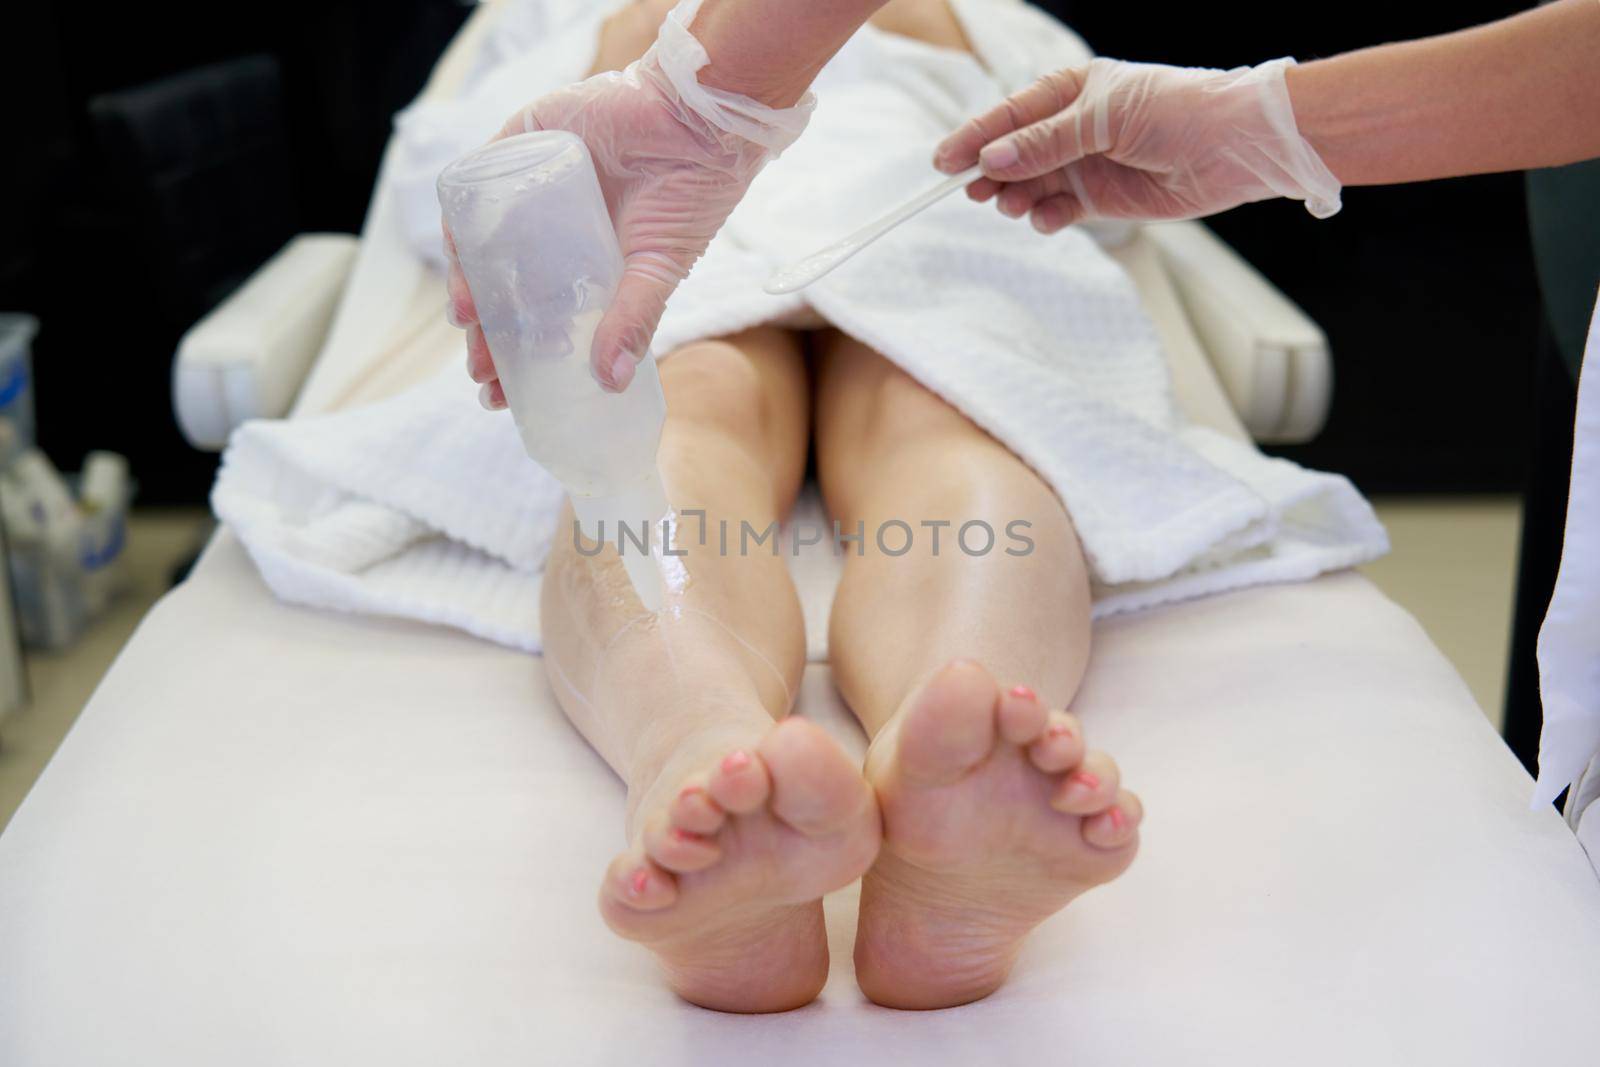 Cosmetologist preparing female patient for laser hair removal on legs in spa salon by Mariakray